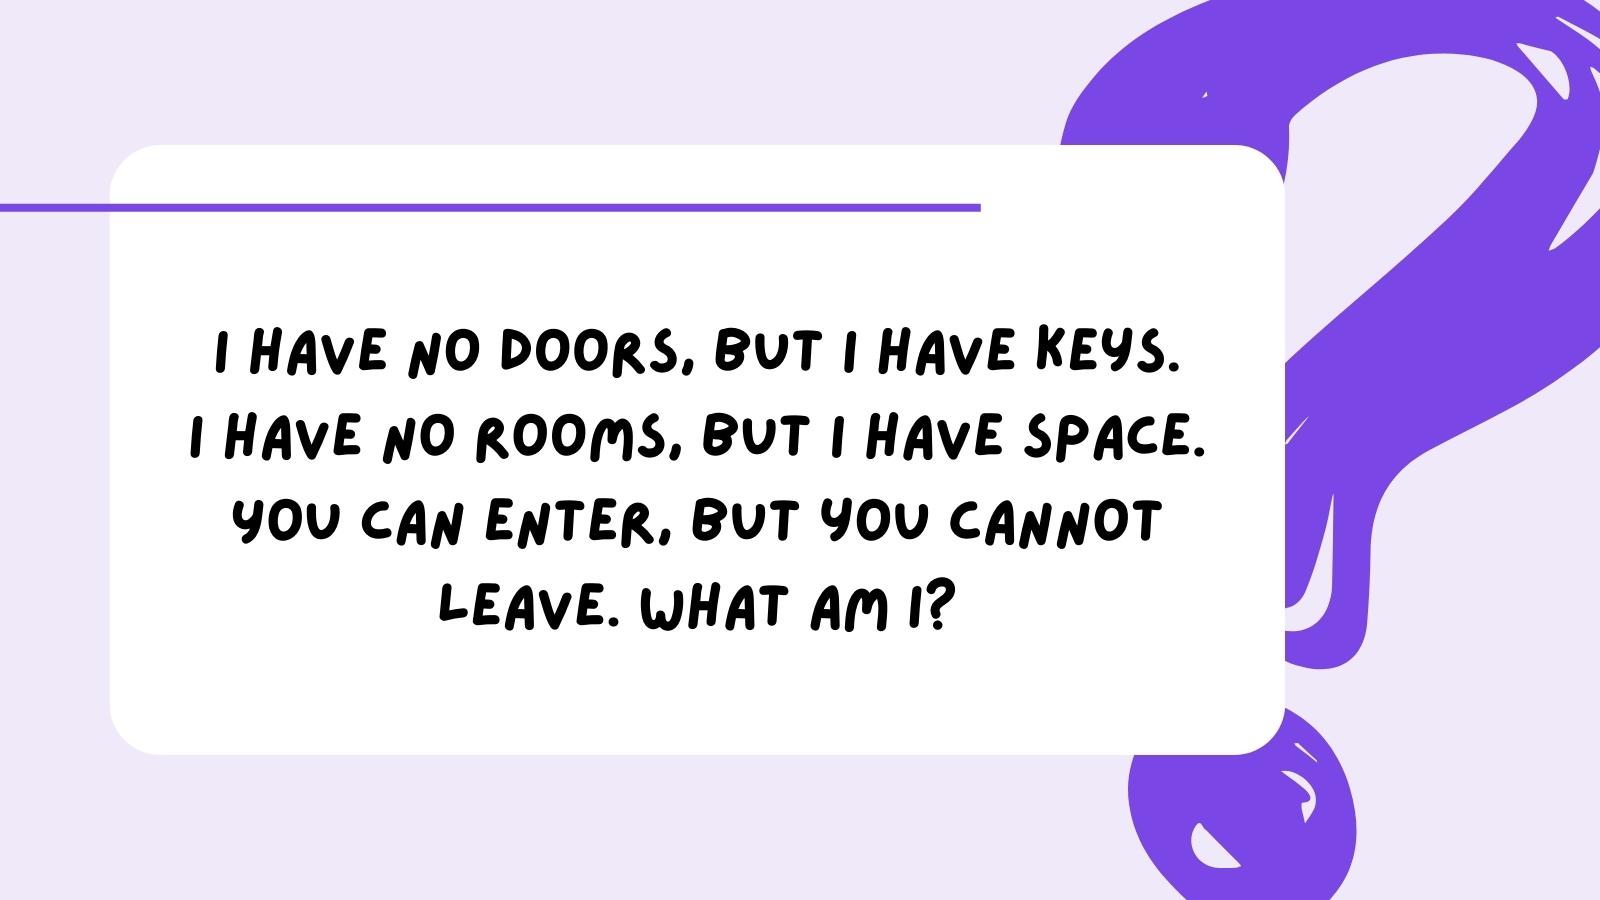 I have no doors, but I have keys. I have no rooms, but I have space. You can enter, but you cannot leave. What am I?